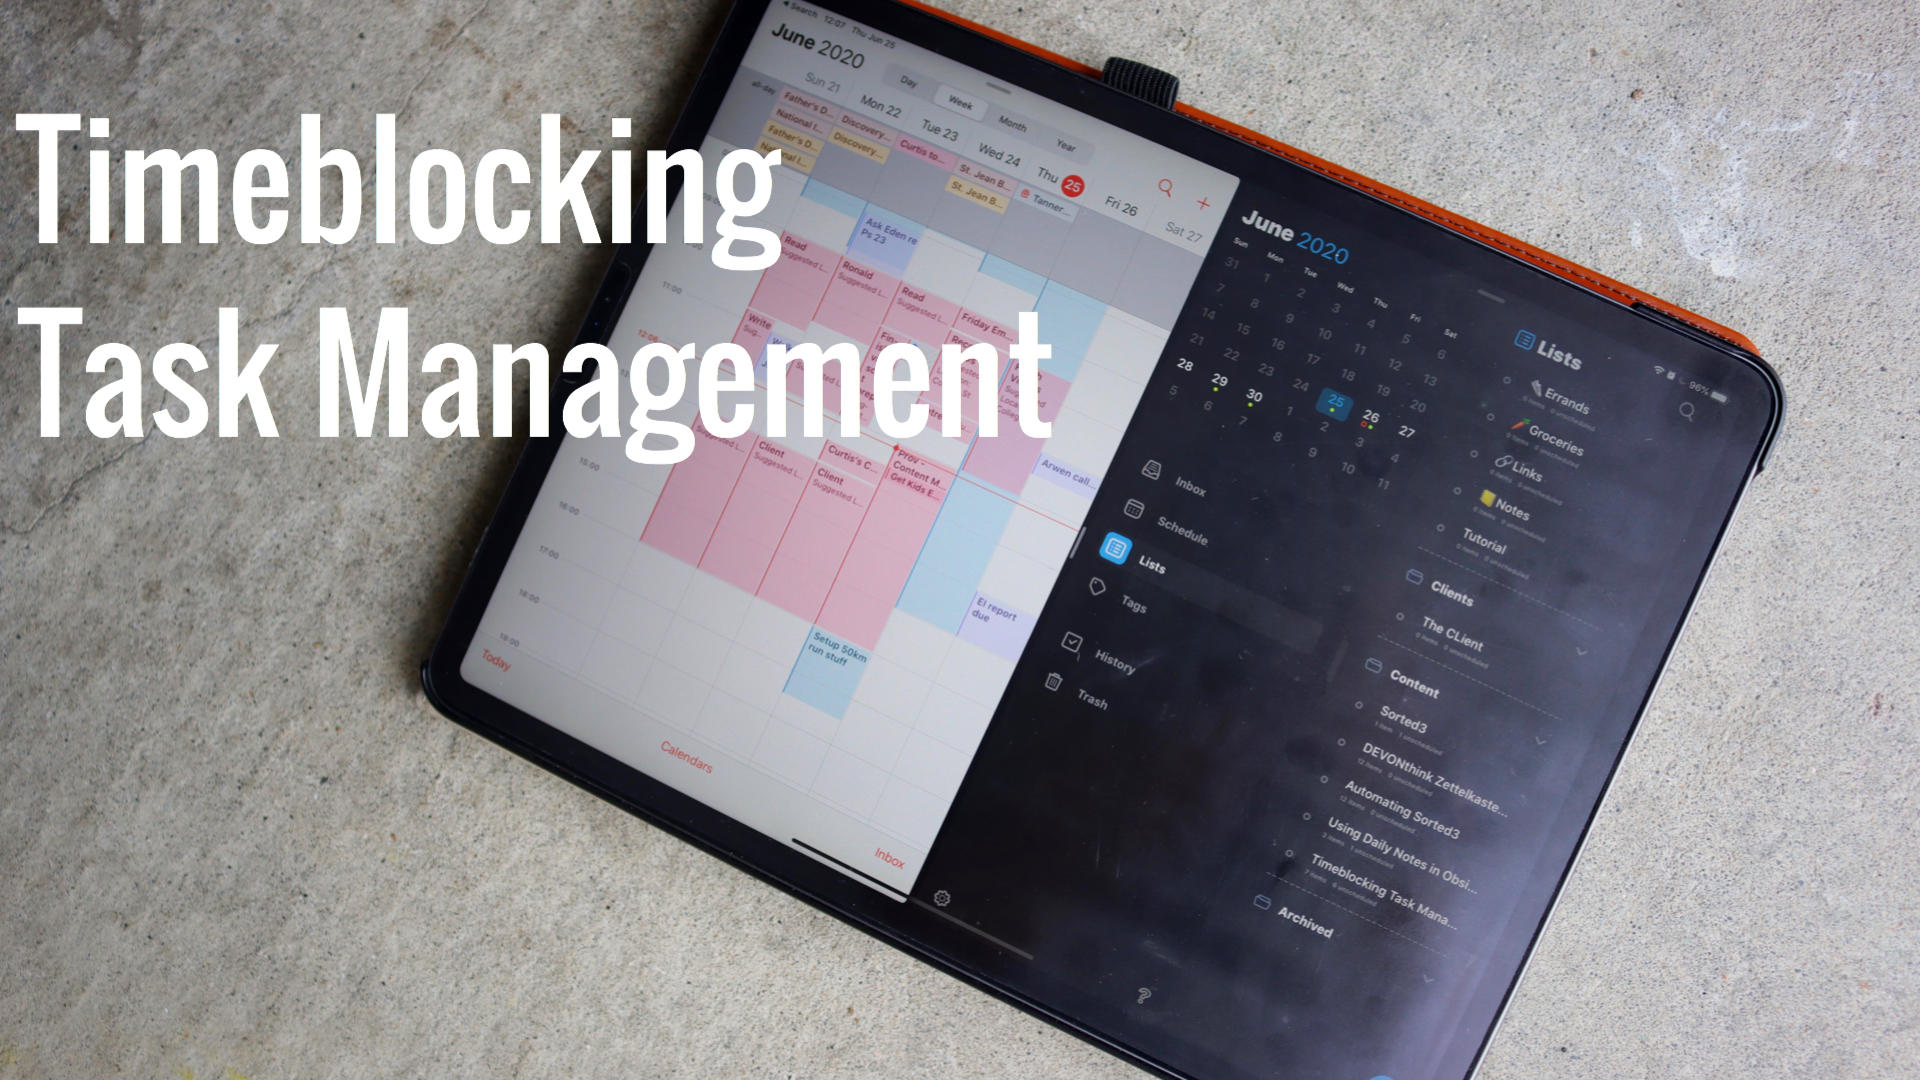 The Timeblocking Task Manager I Want